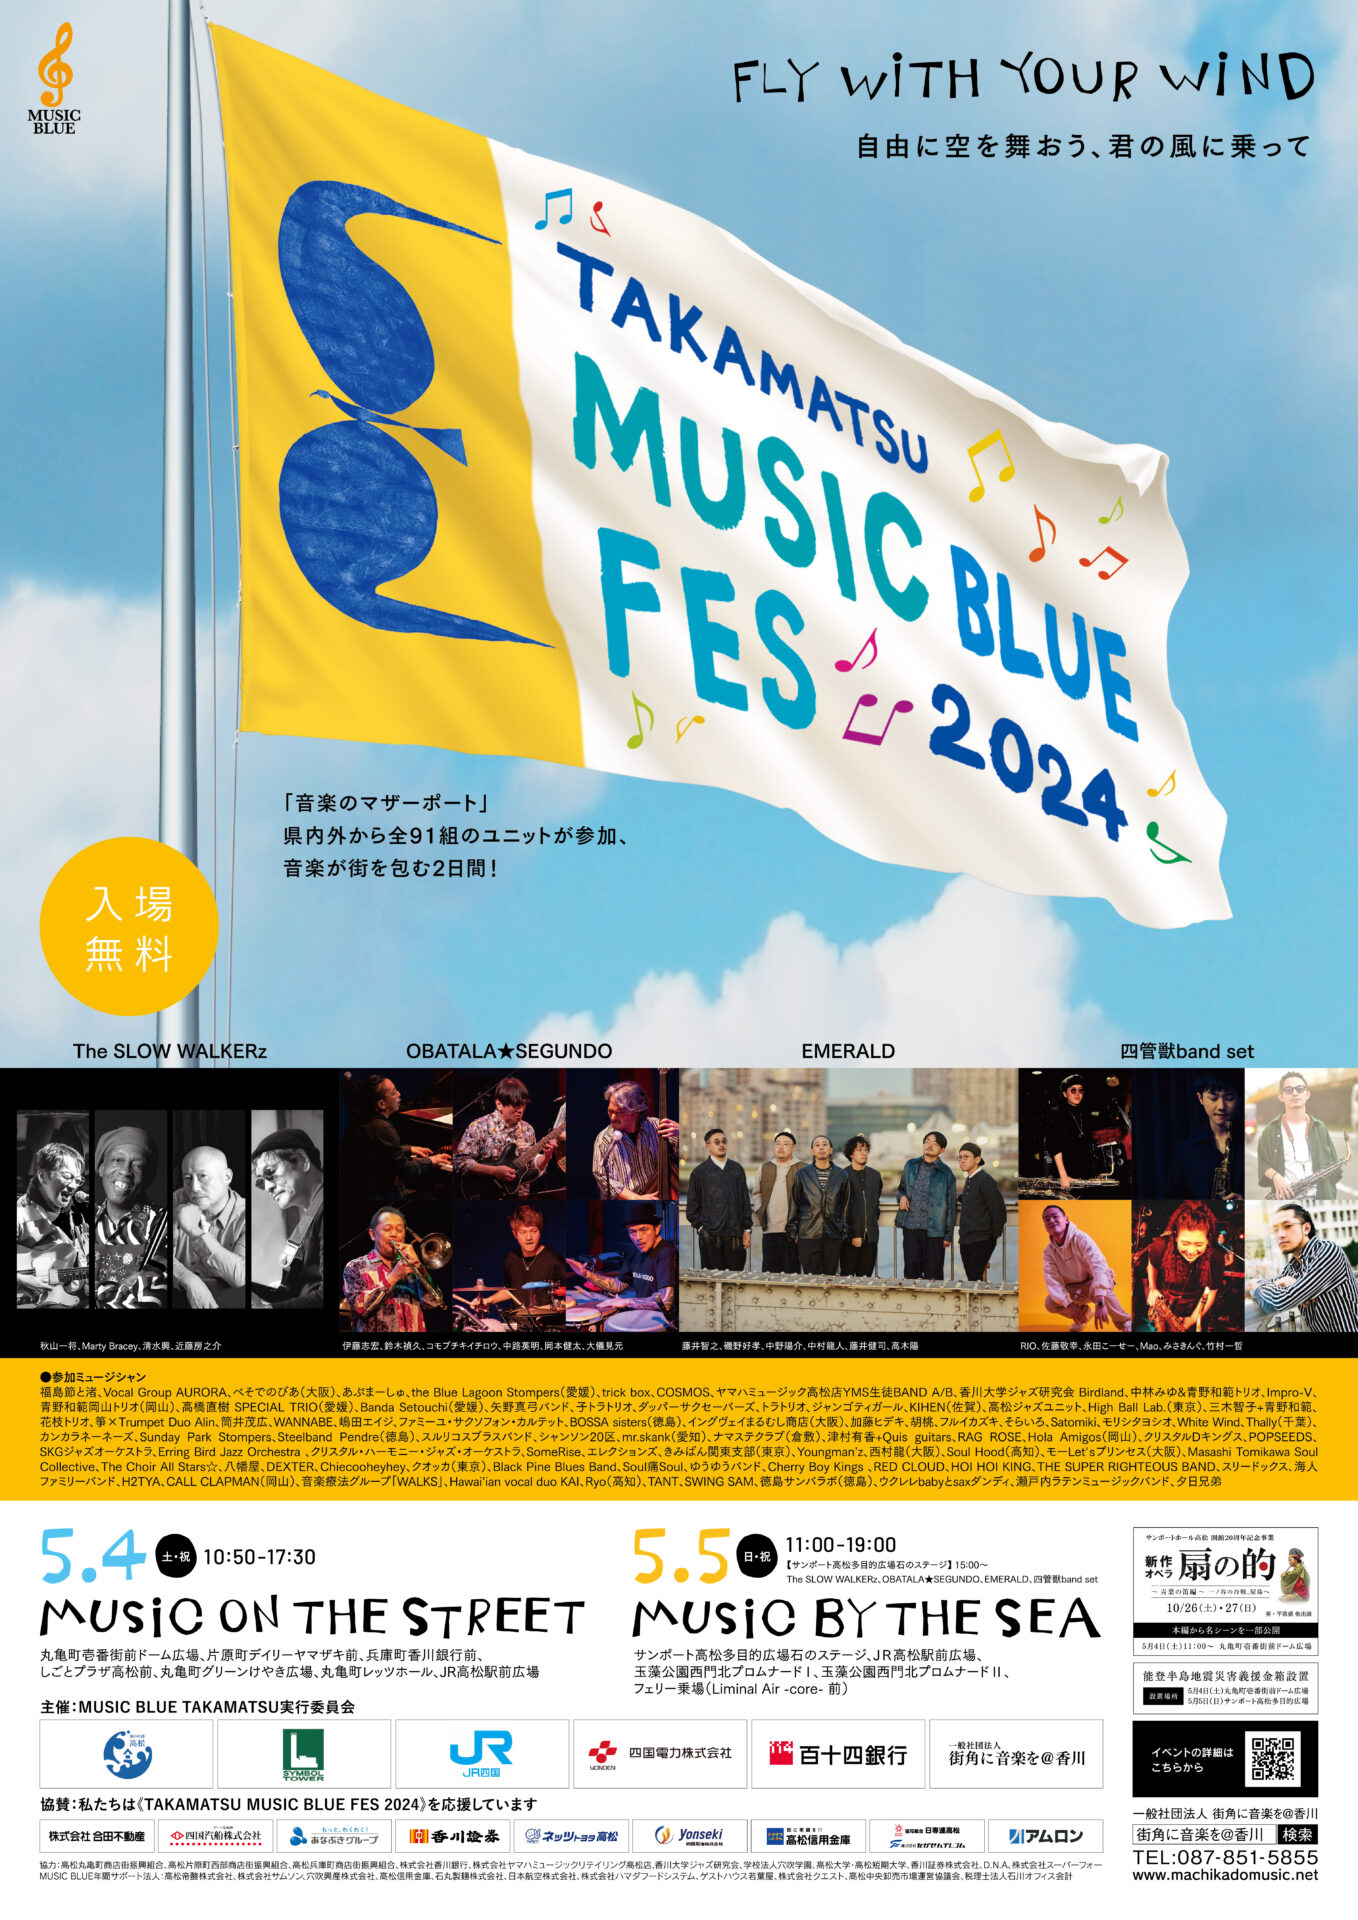 TAKAMATSU MUSIC BLUE FES 2024~Fly with your wind~のイメージ画像